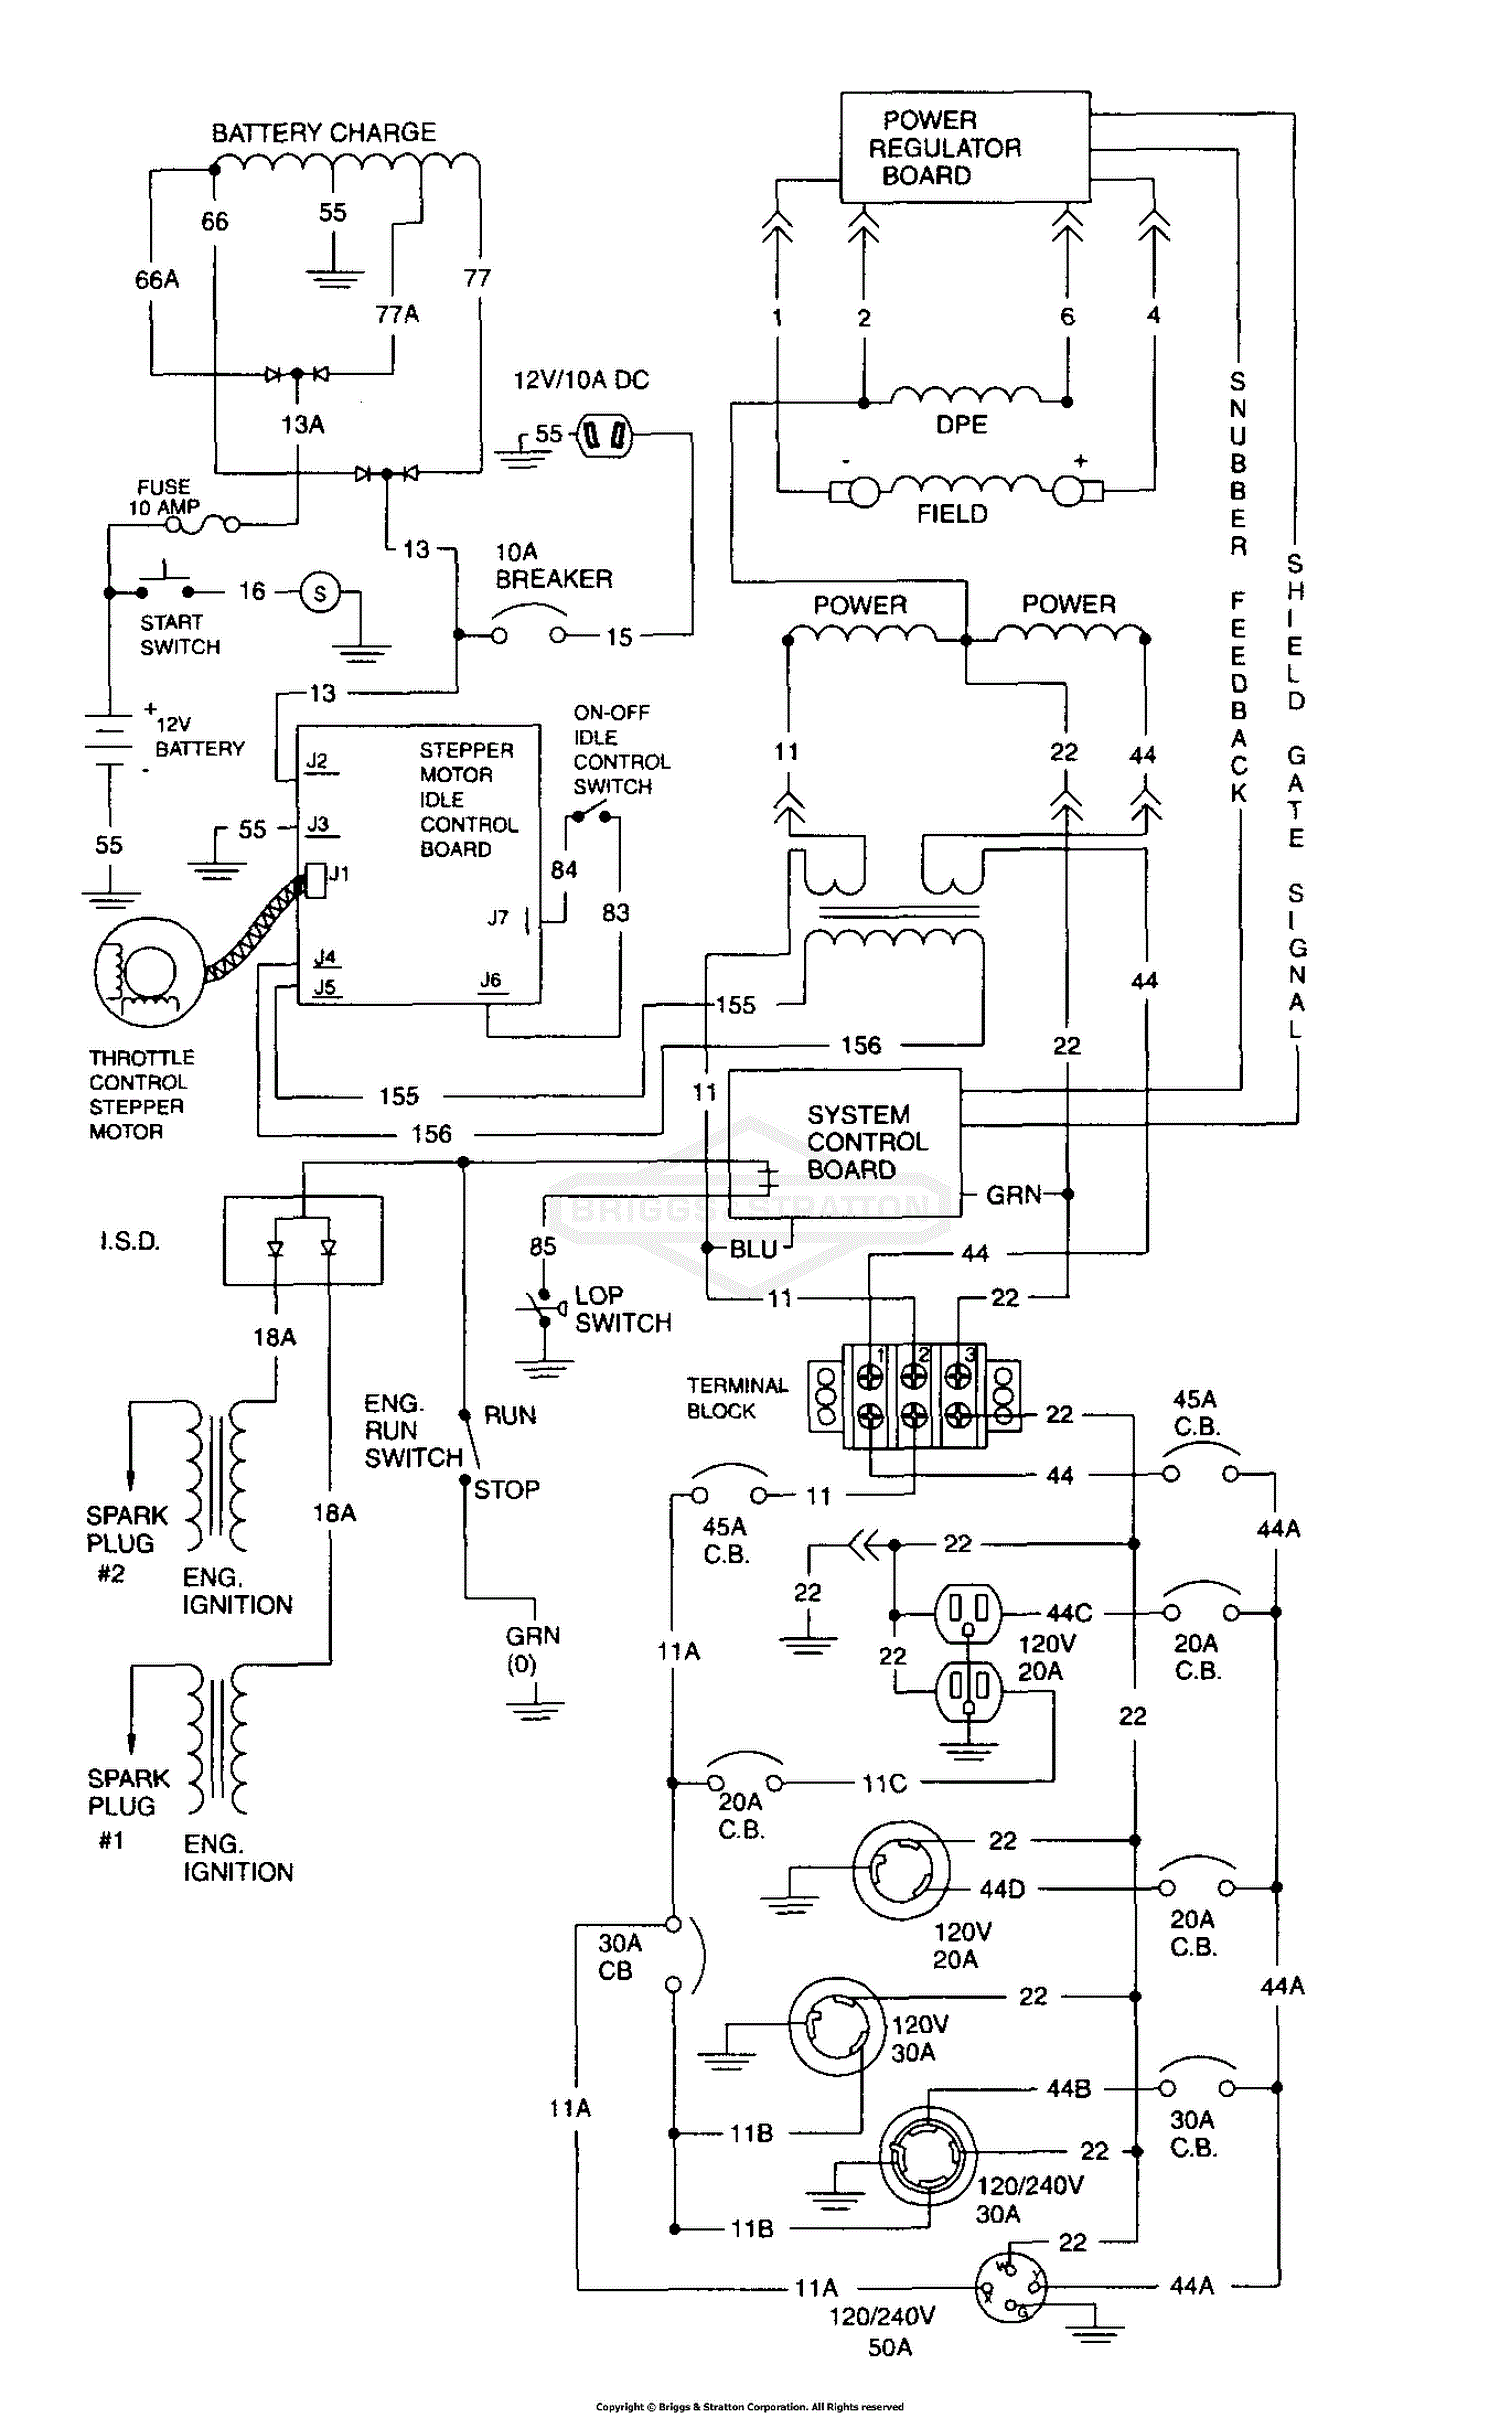 Briggs and Stratton Power Products 9801-4 - 10,000 EXL Parts Diagram ...